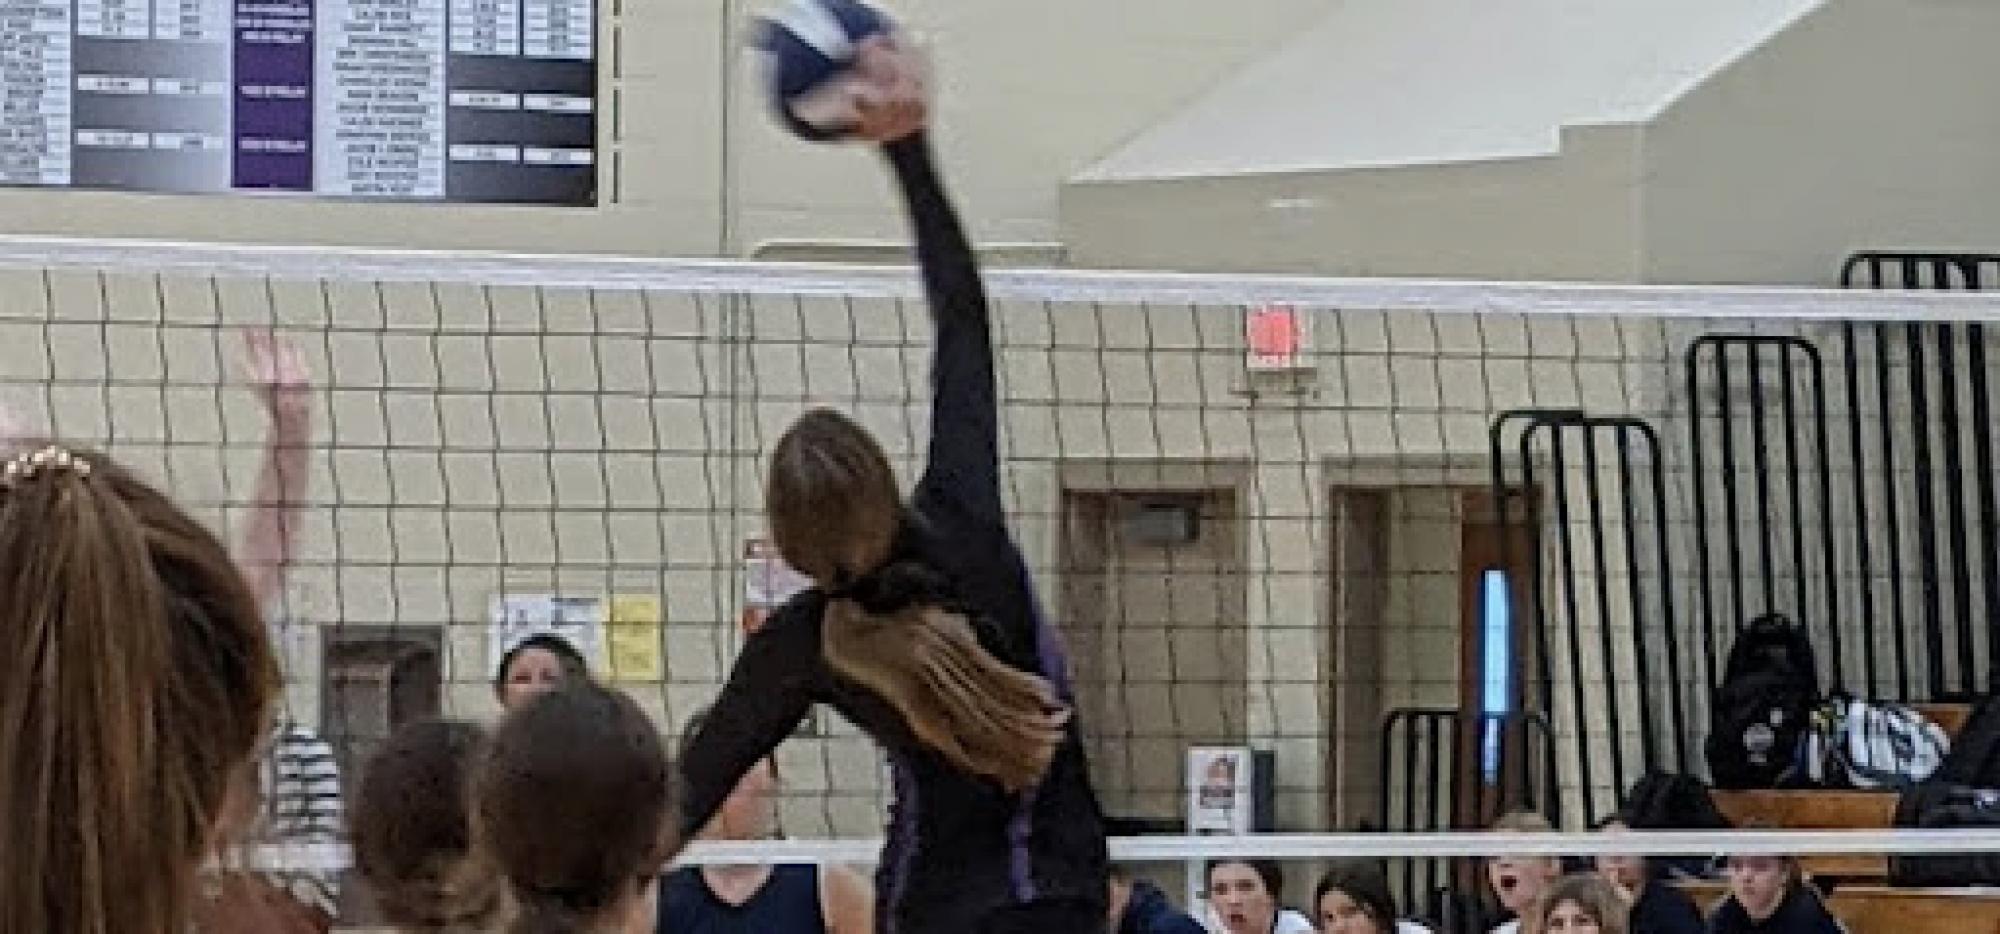 image of volleyball action